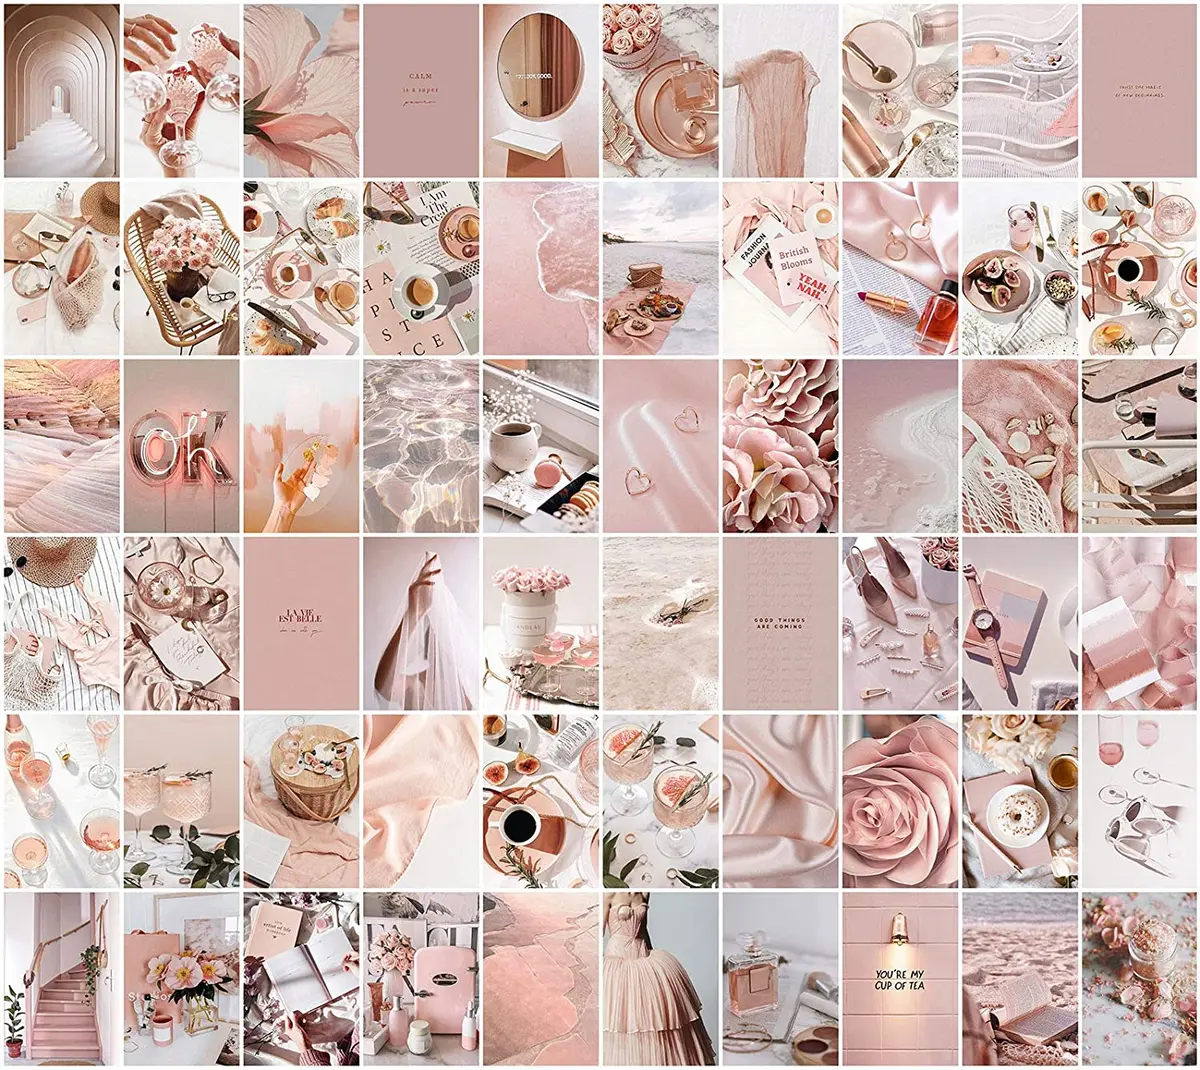 A collage of 60 photos in a pink aesthetic. - Pink collage